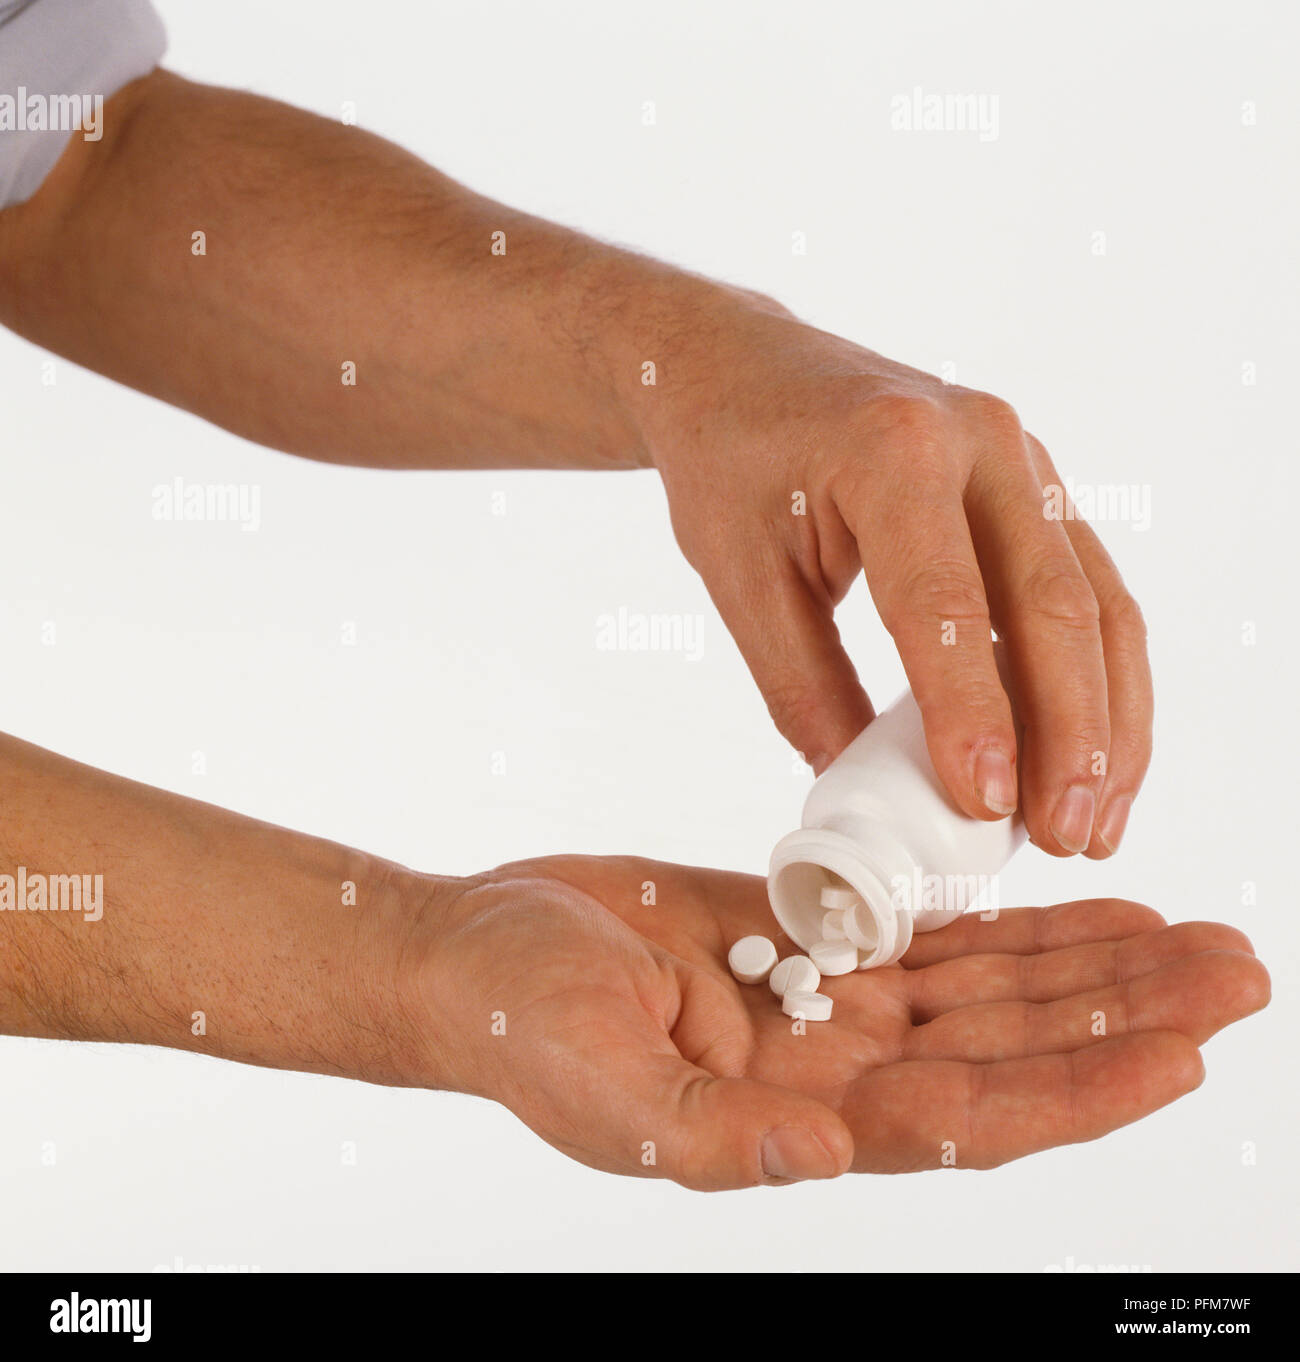 Close-up of one hand pouring white tablets into another hand. Stock Photo